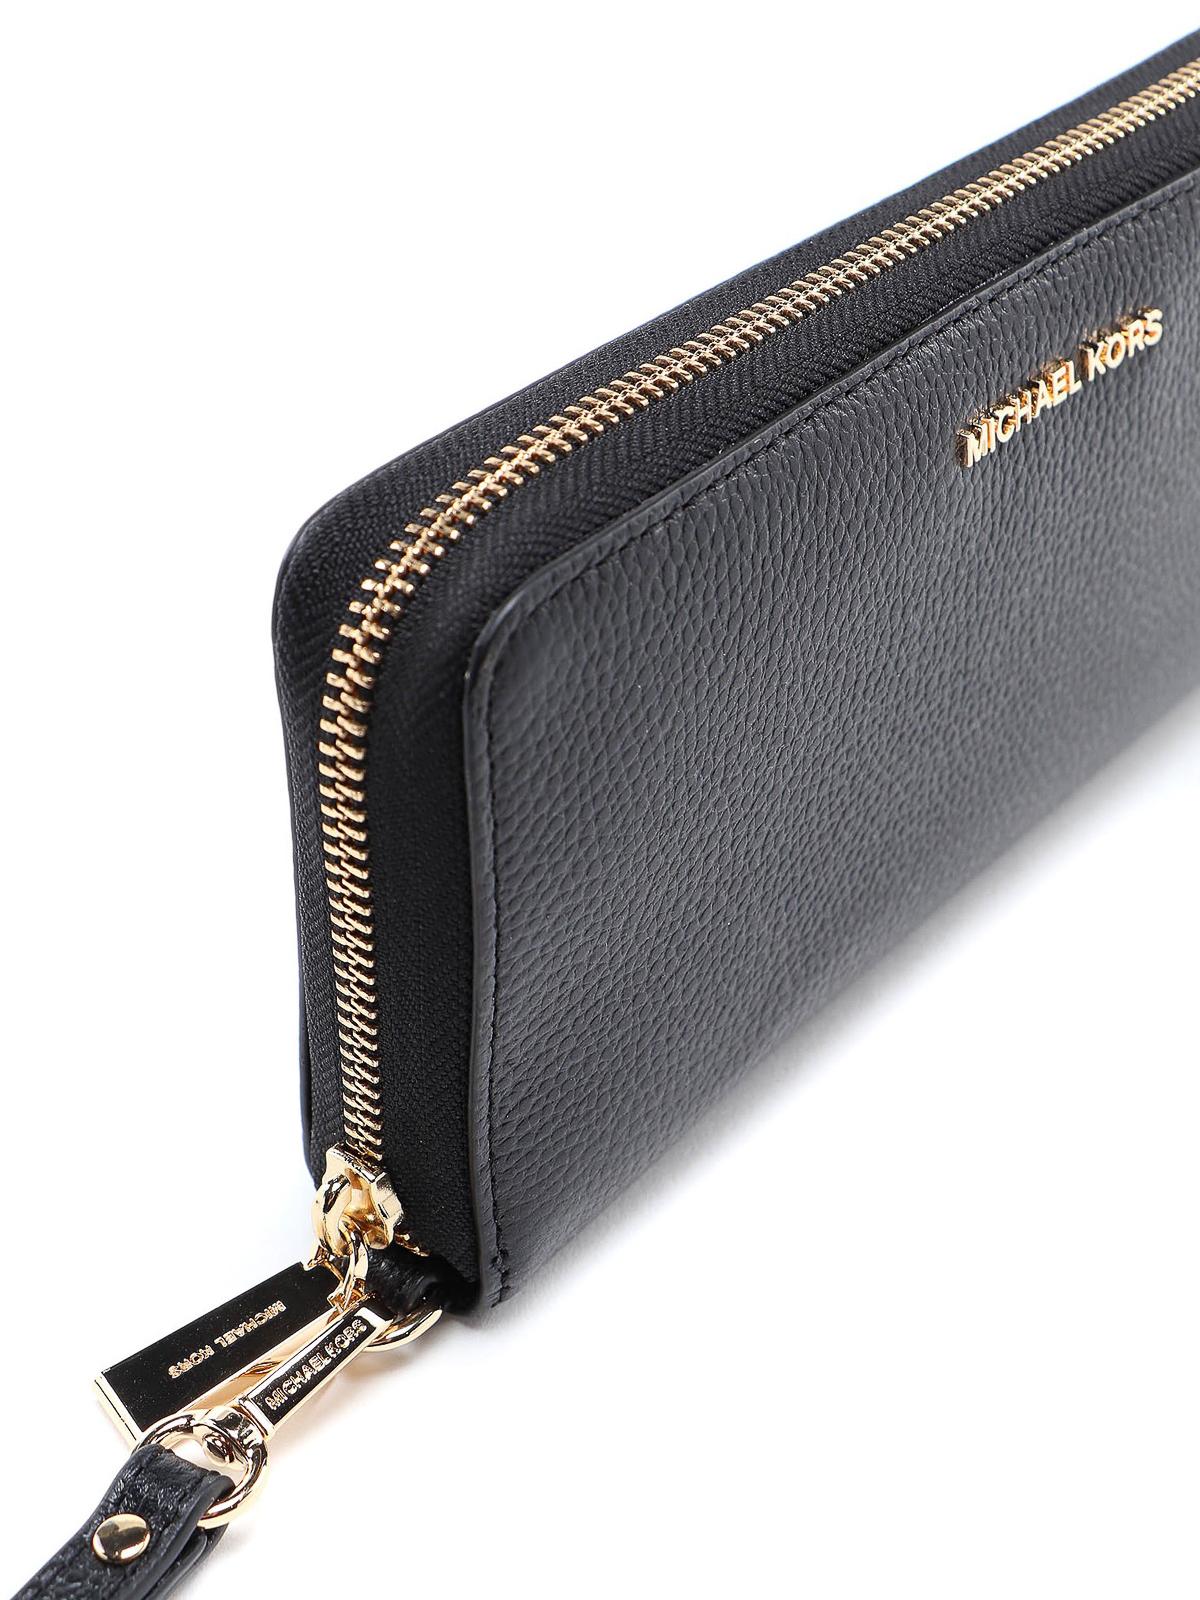 Michael Kors Leather Jet Set Travel Continental Wallet in Black - Lyst